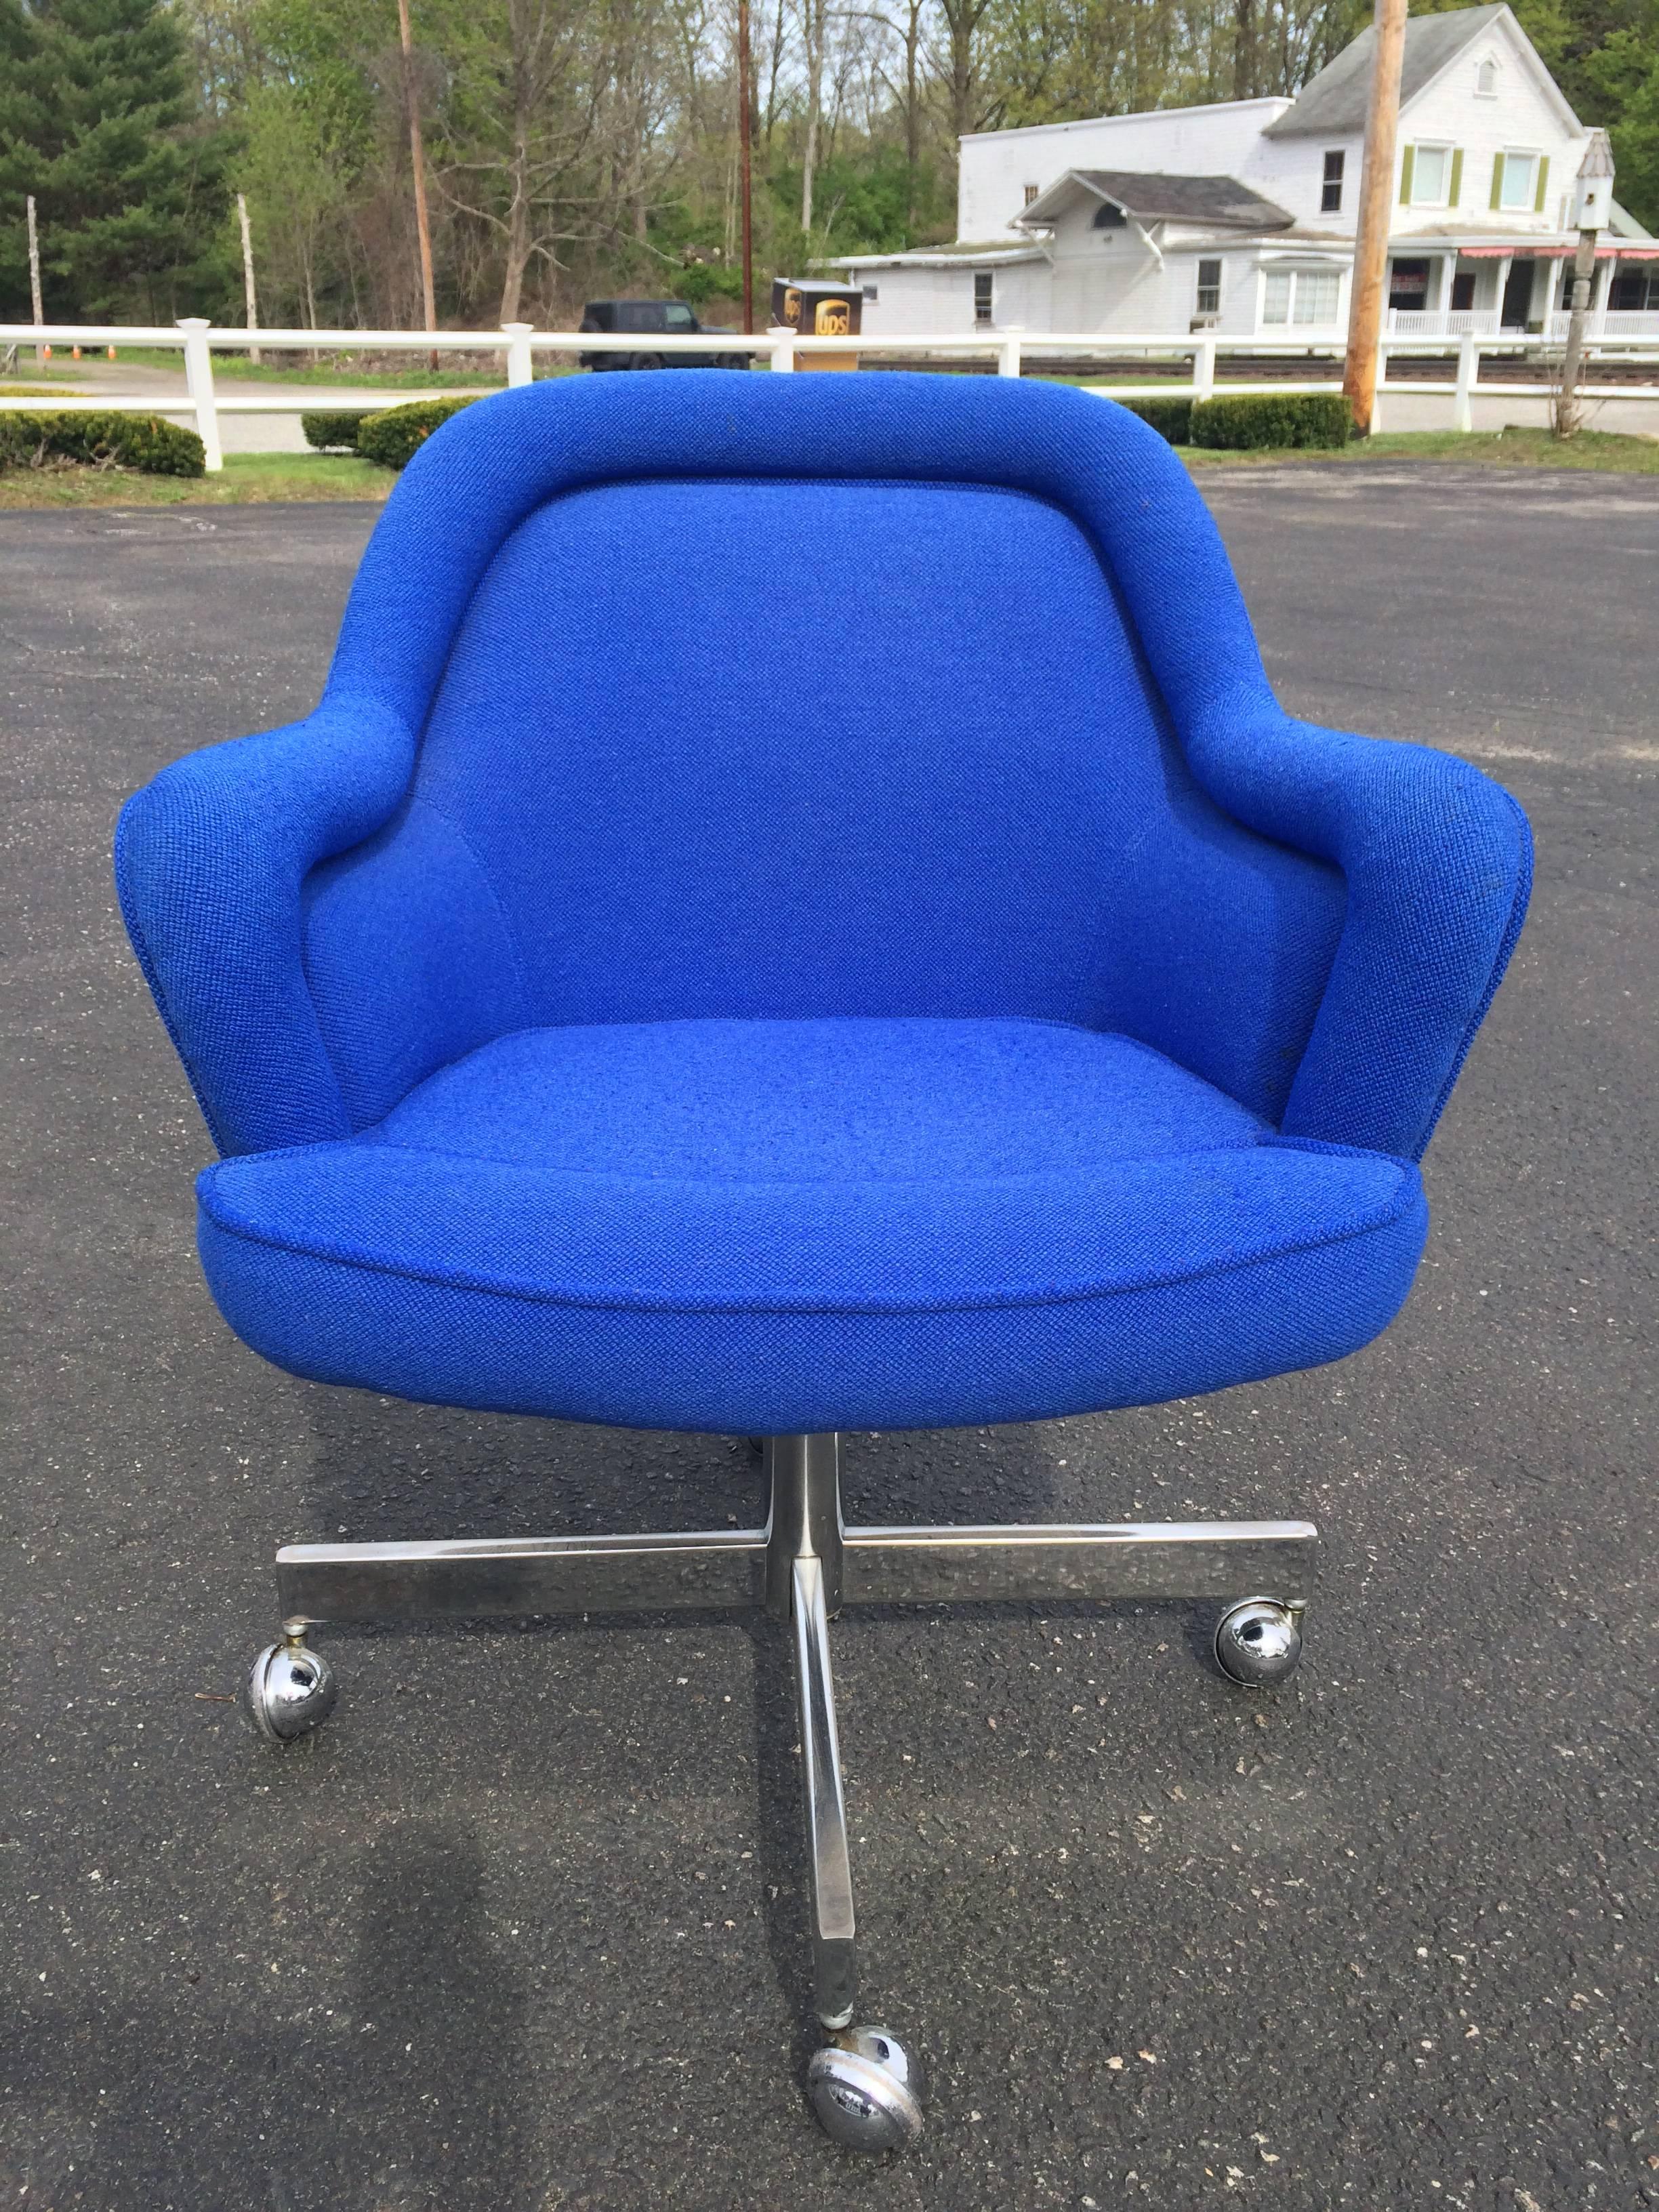 Mid-Century Swivel Chair in the Style of Max Pearson. With its original electric blue upholstery this chair swivels and rolls on its chrome ball bearing castors. Fun for office or any Mid-Century home. Very good condition! Most likely manufactured